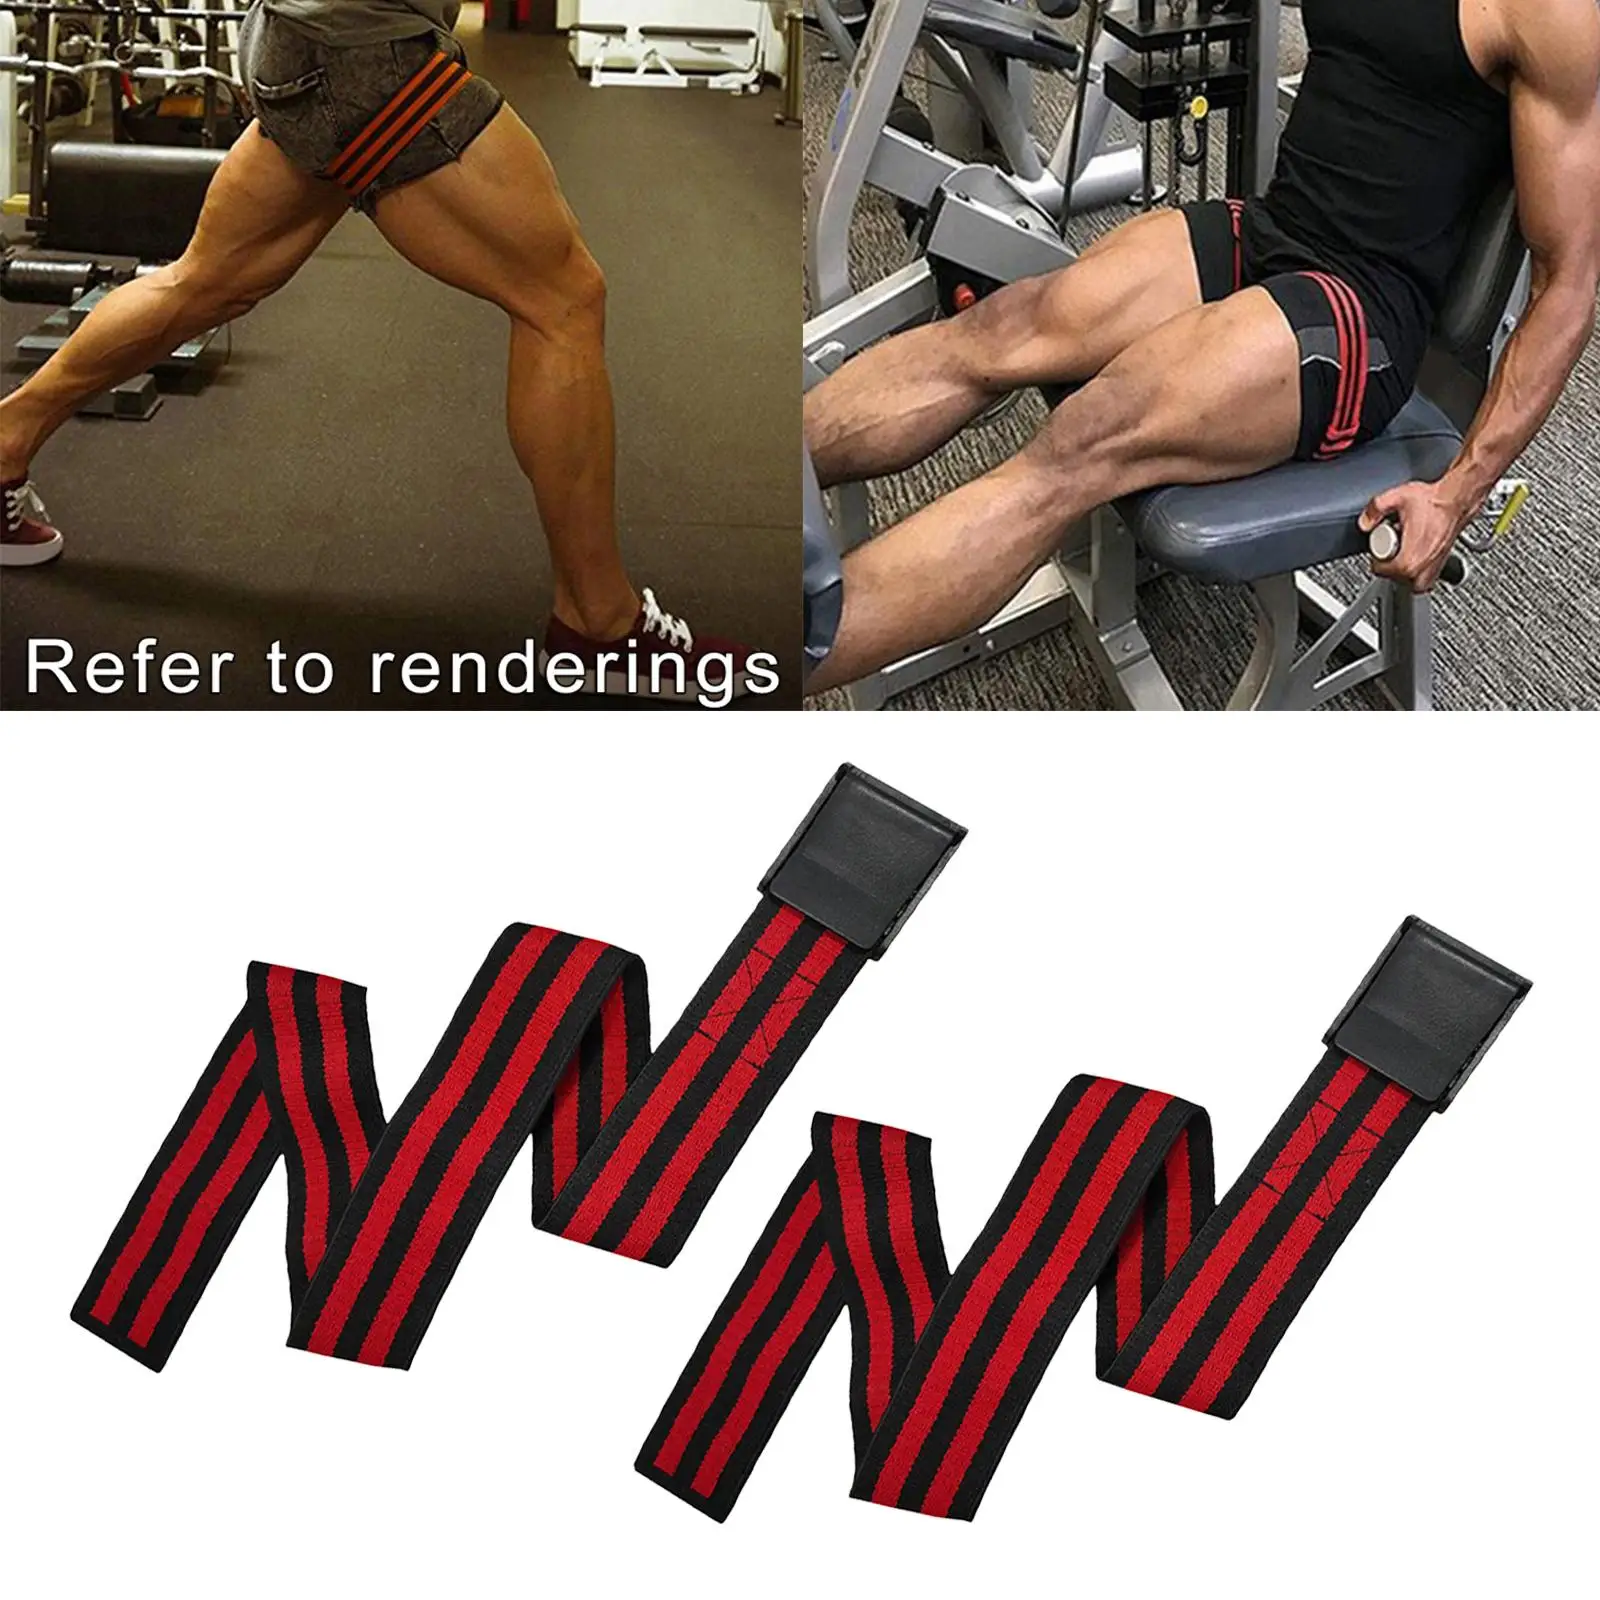  Blood Flow Restriction Training Arm Thigh Fitness